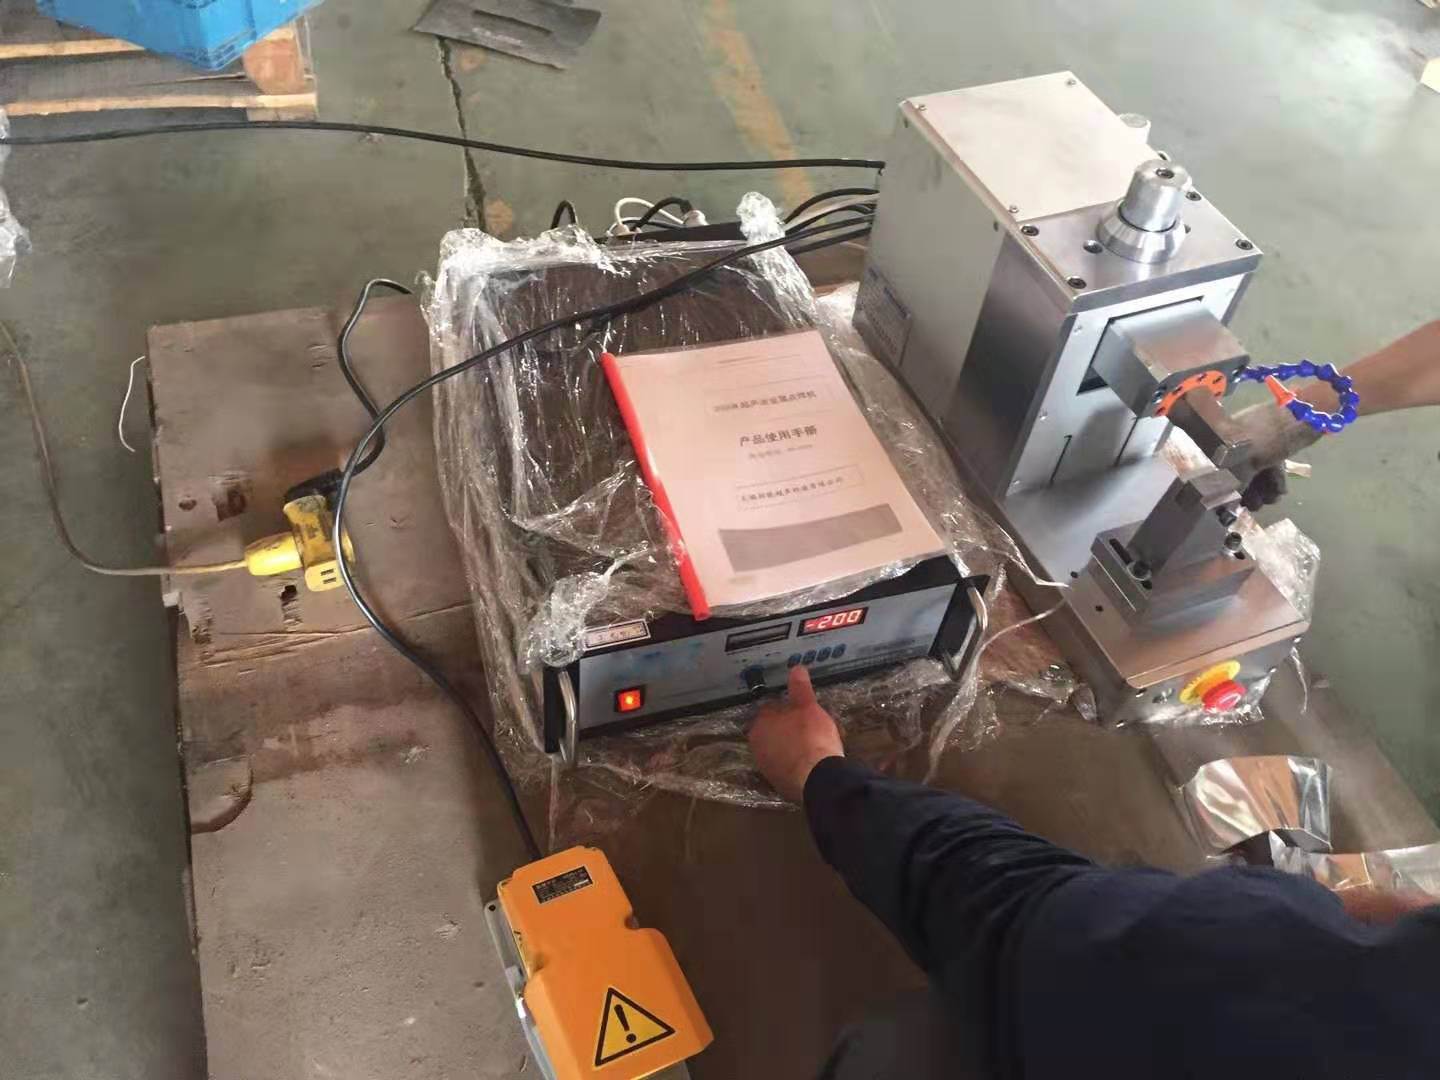 20 Khz Ultrasonic Metal Welding Machine For Braided Wire With Special Steel Welding Horn